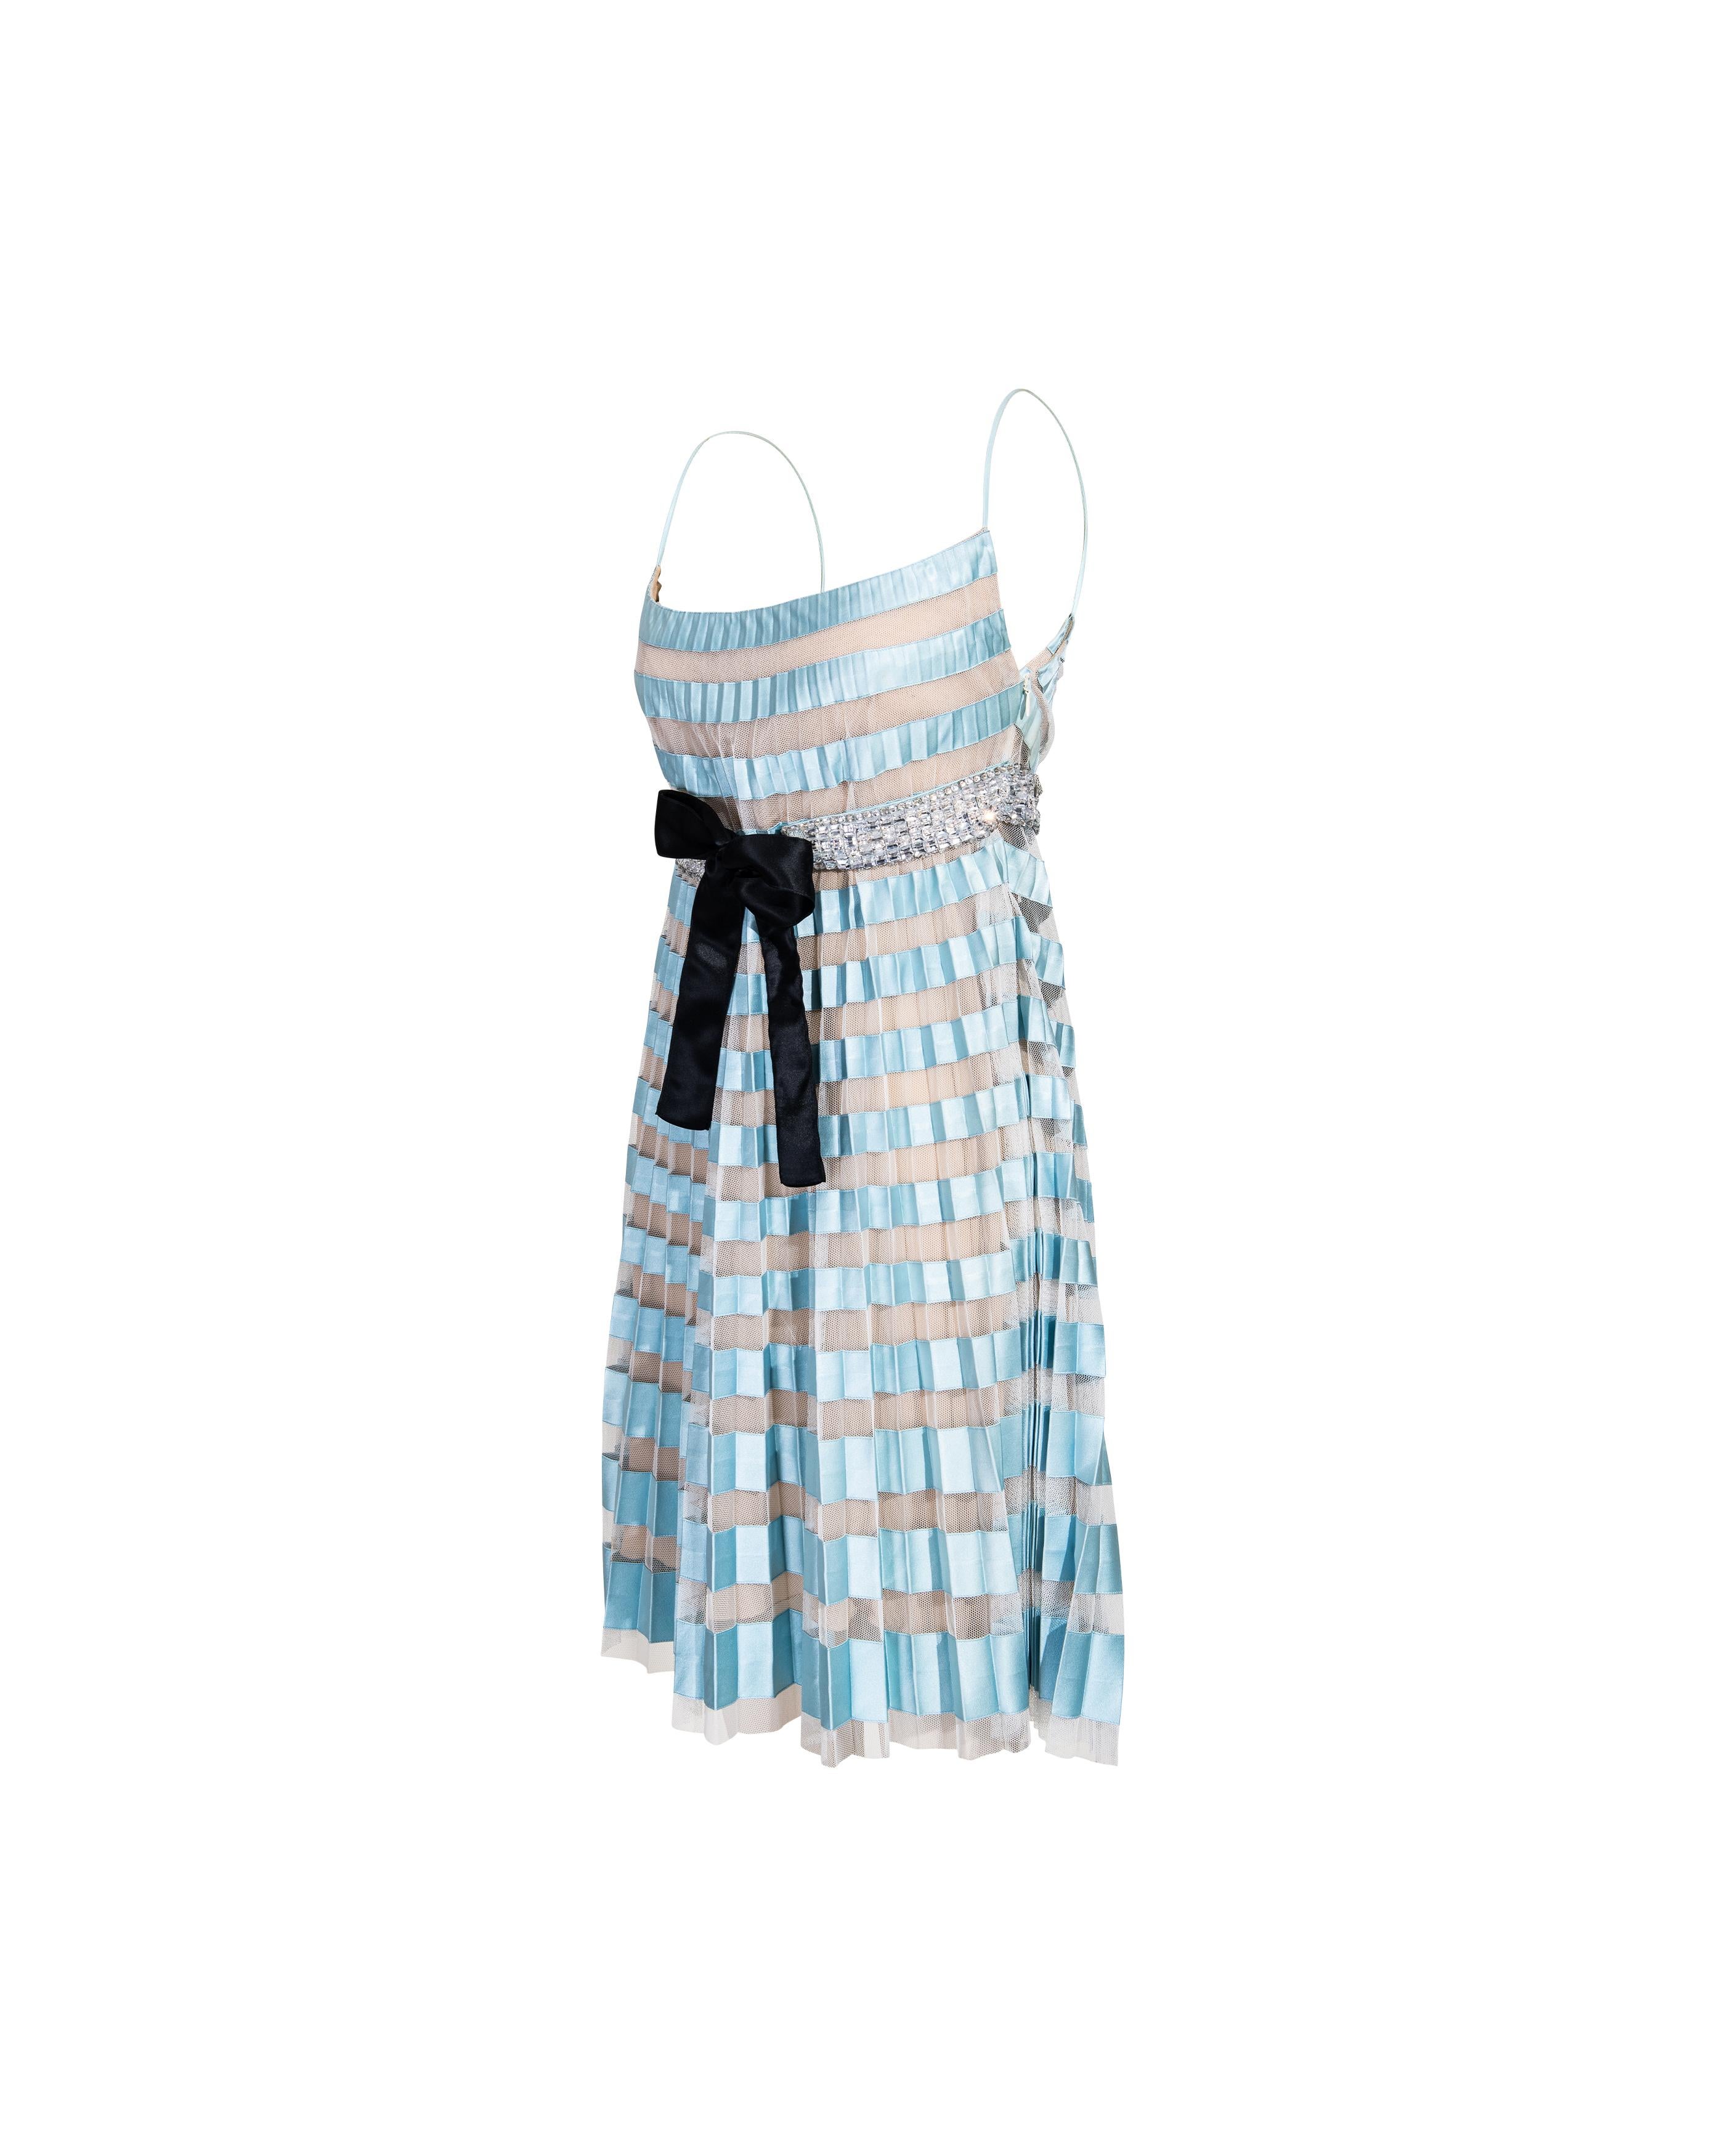 S/S 2007 Valentino Sky Blue Pleated Mini Dress In Good Condition For Sale In North Hollywood, CA